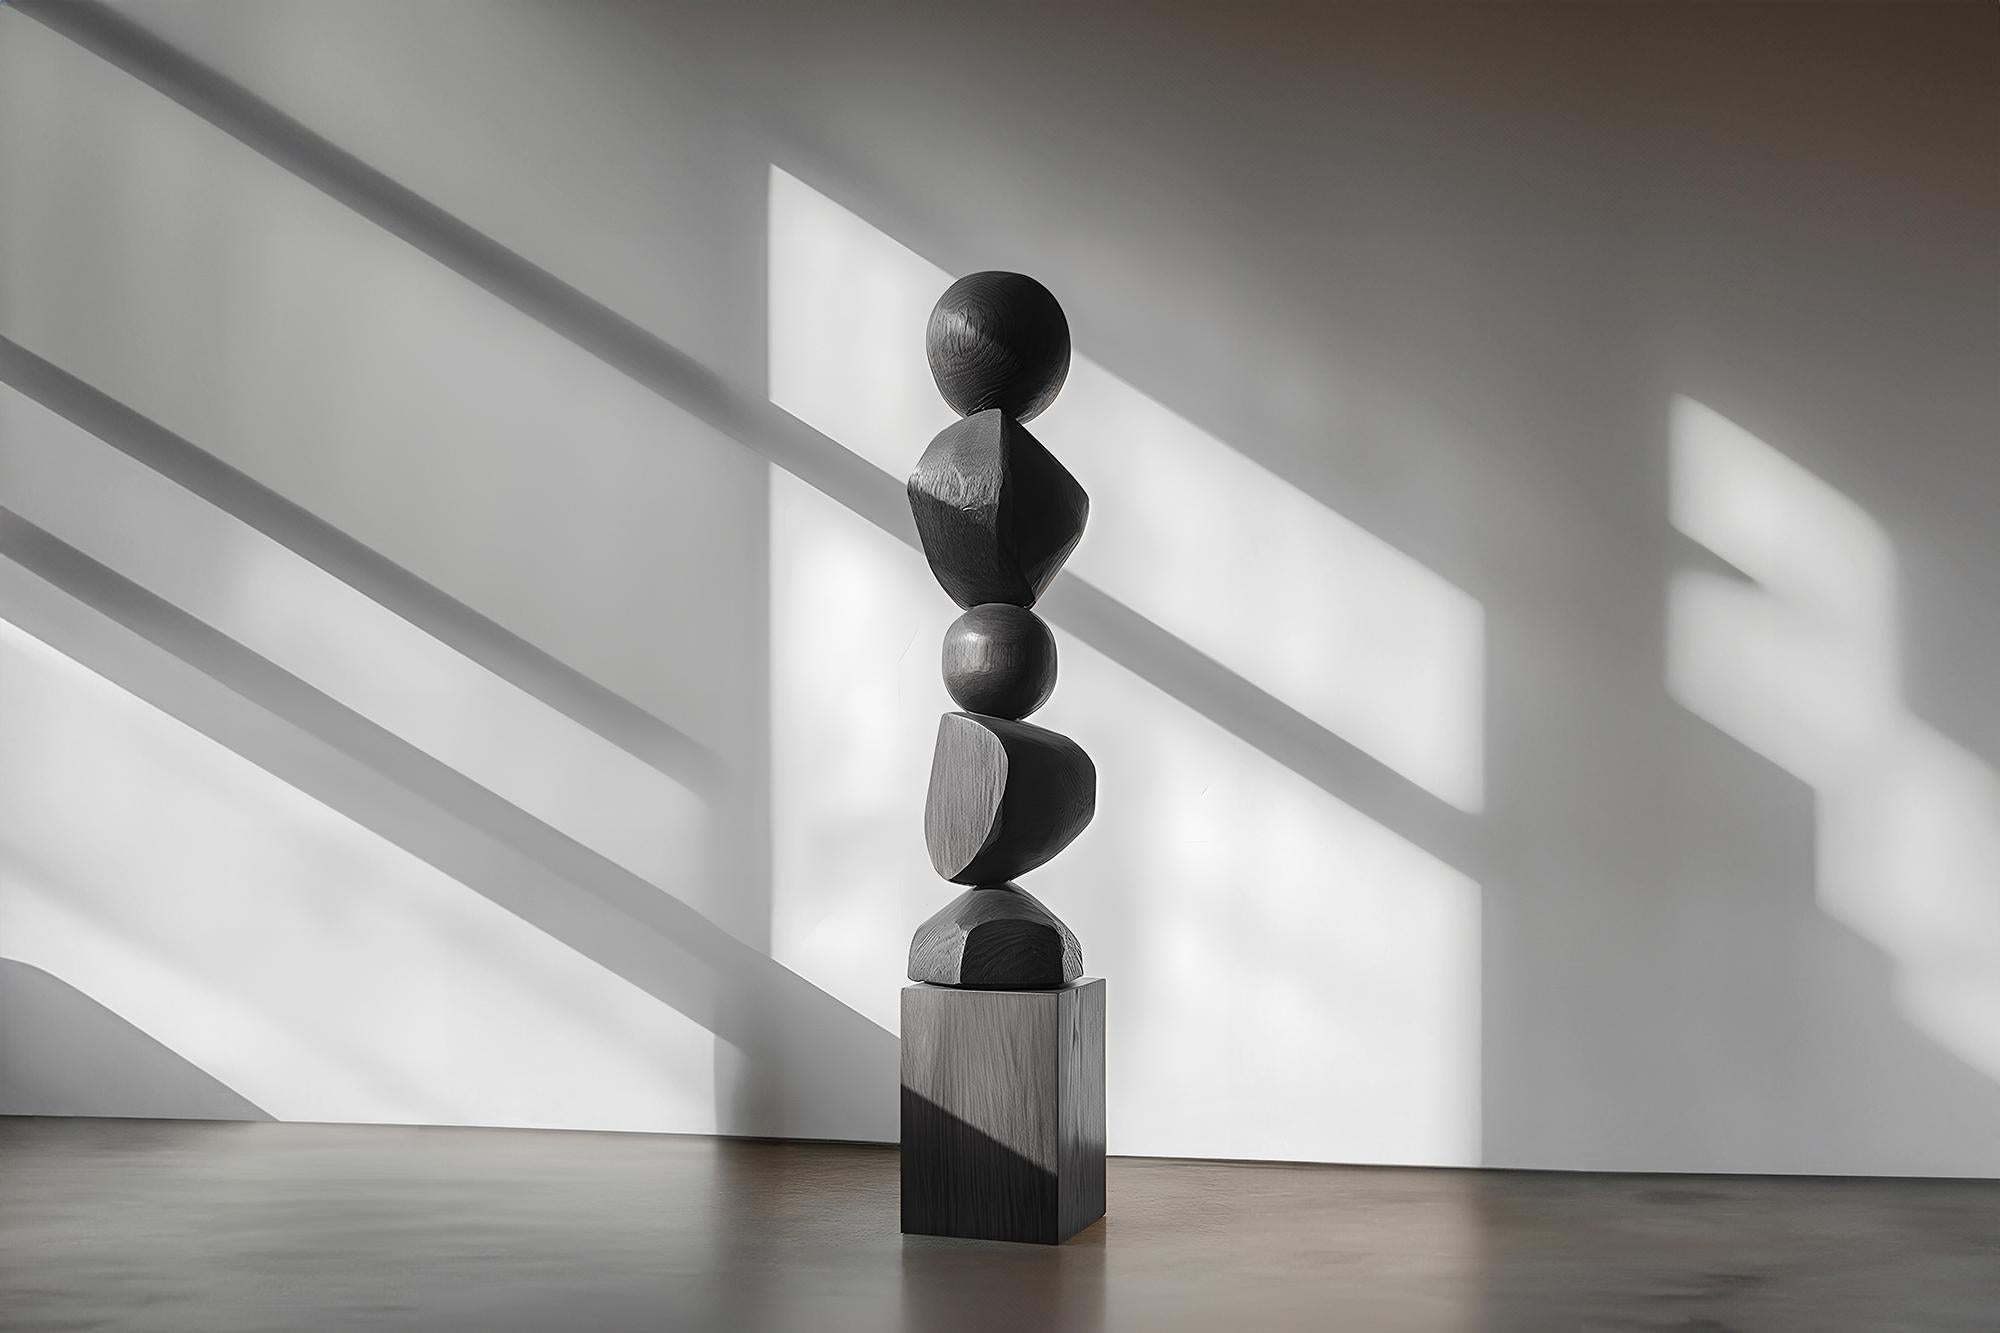 Dark Elegance, Biomorphic Black Solid Wood Crafted by NONO, Still Stand No93
——

Joel Escalona's wooden standing sculptures are objects of raw beauty and serene grace. Each one is a testament to the power of the material, with smooth curves that